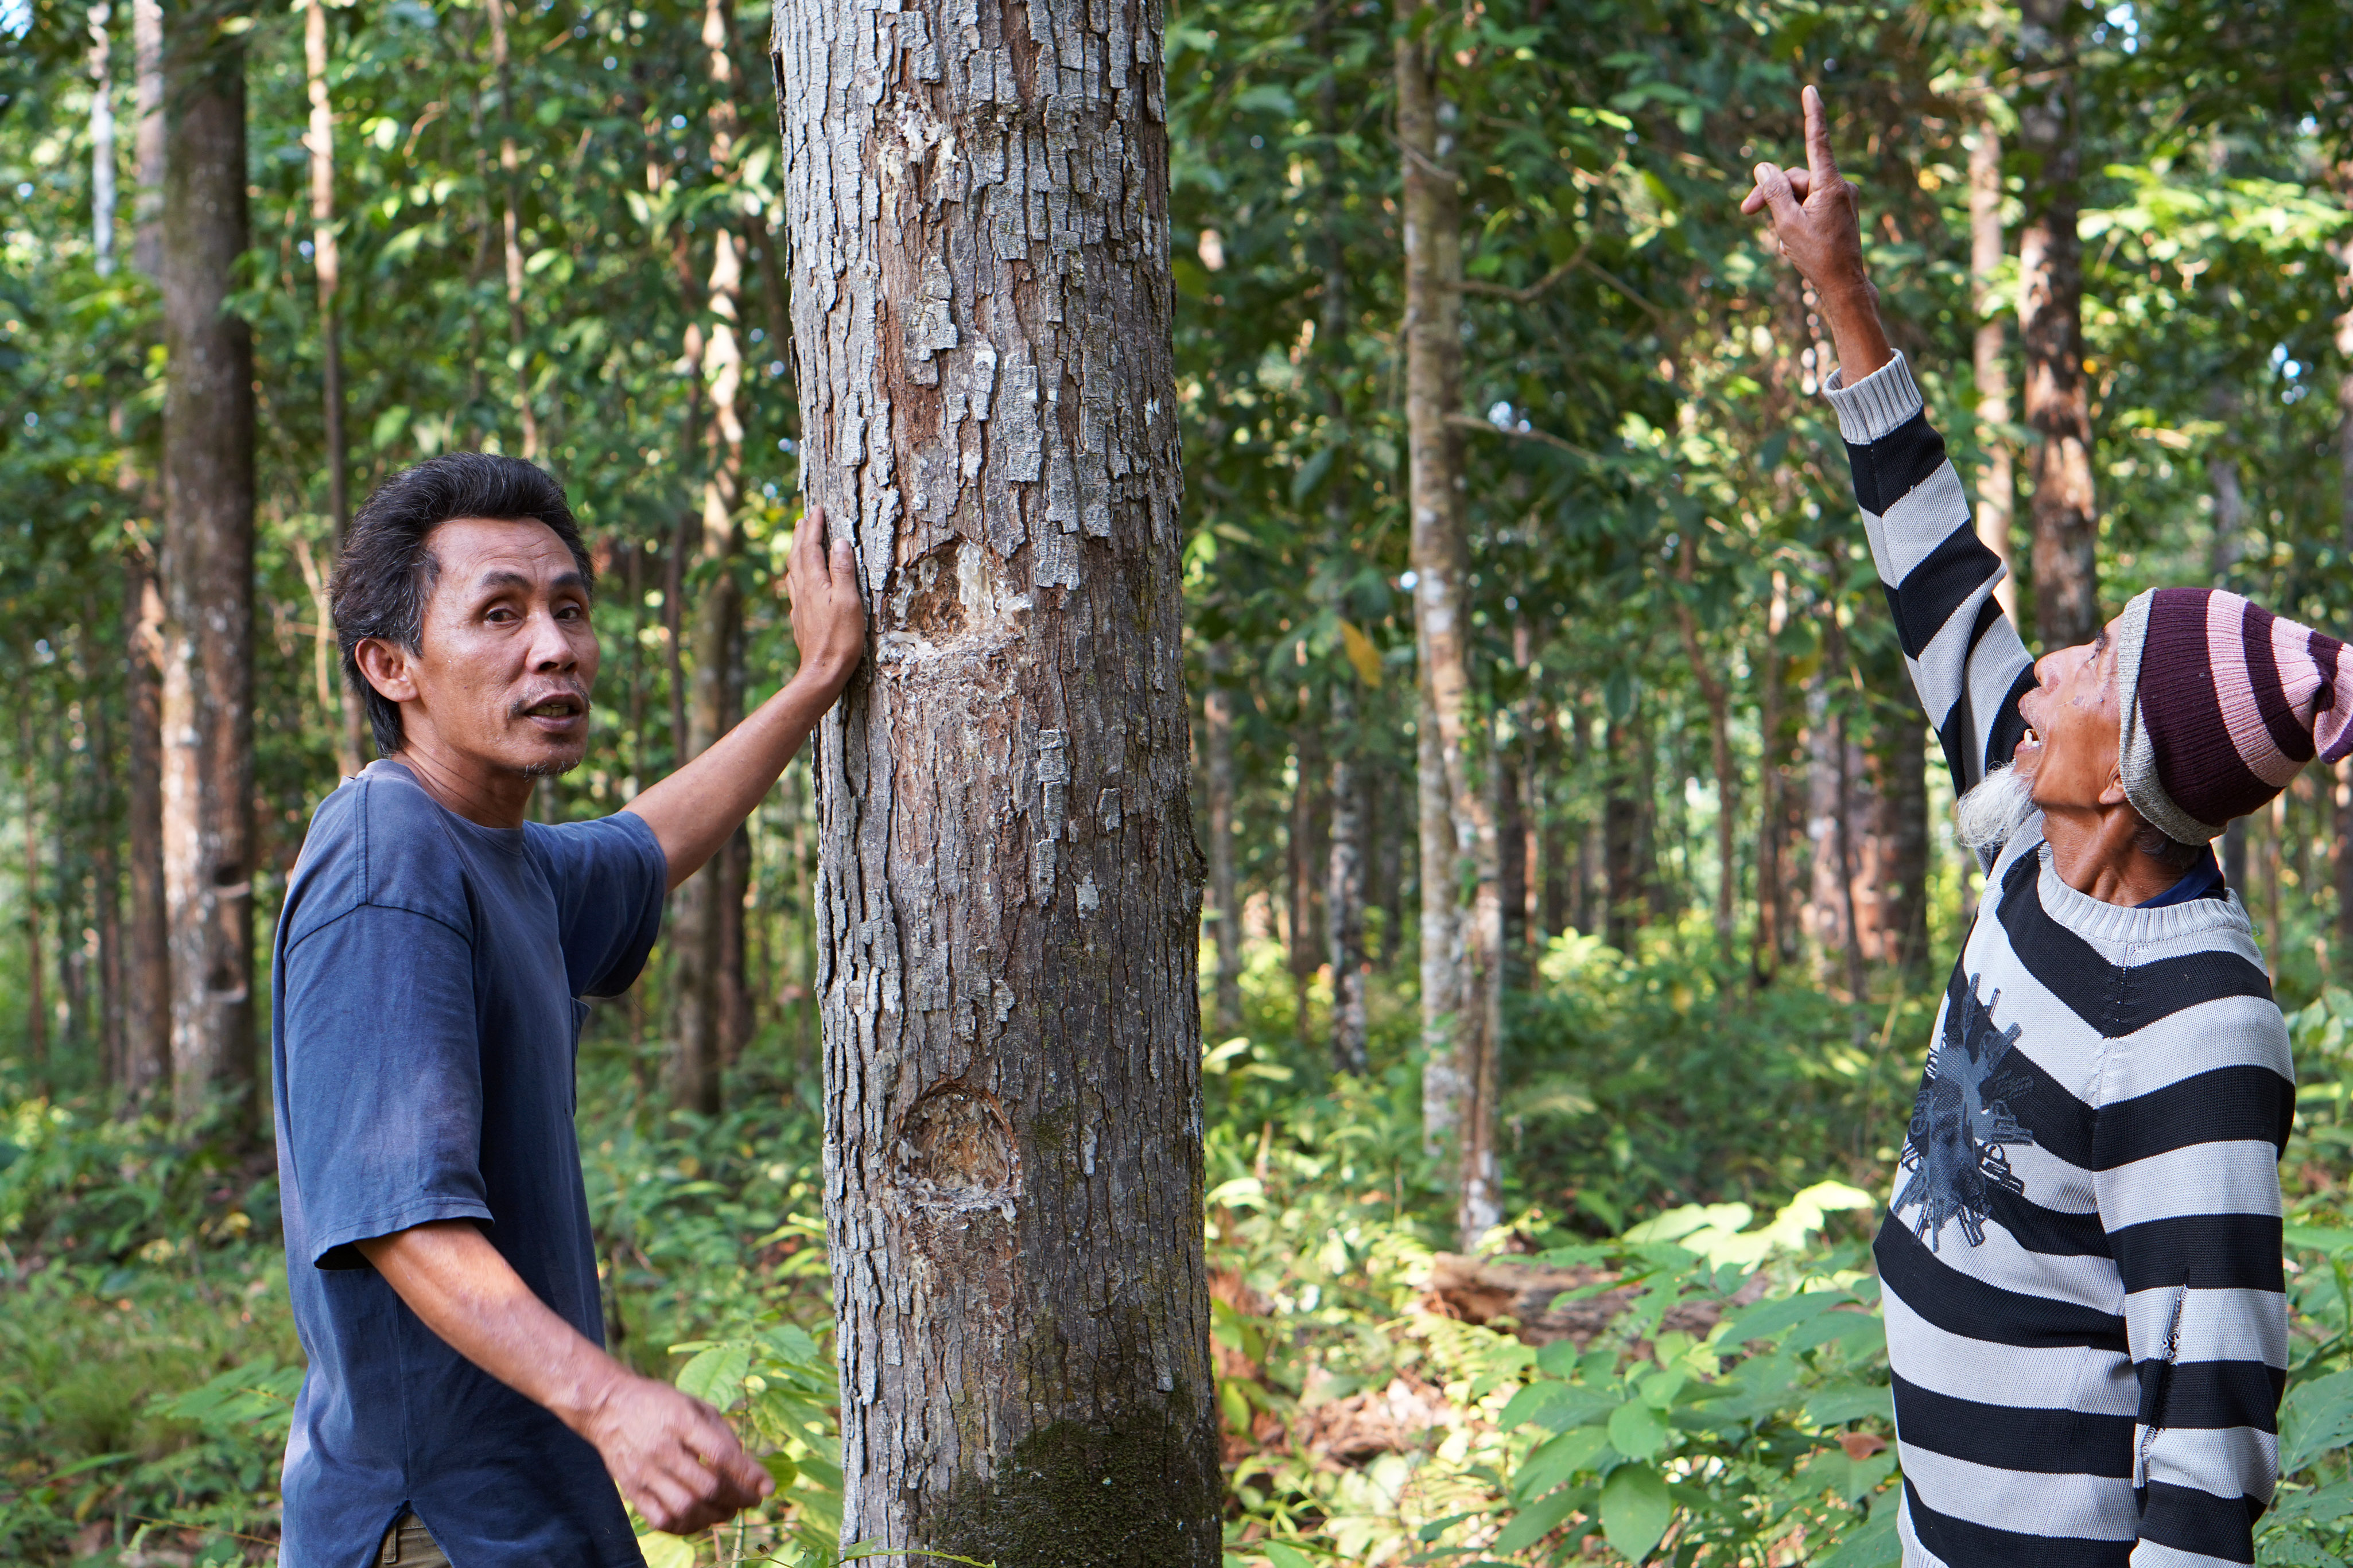 Local farmers from Malaya village collect sap from dammar forests for their family's livelihood.